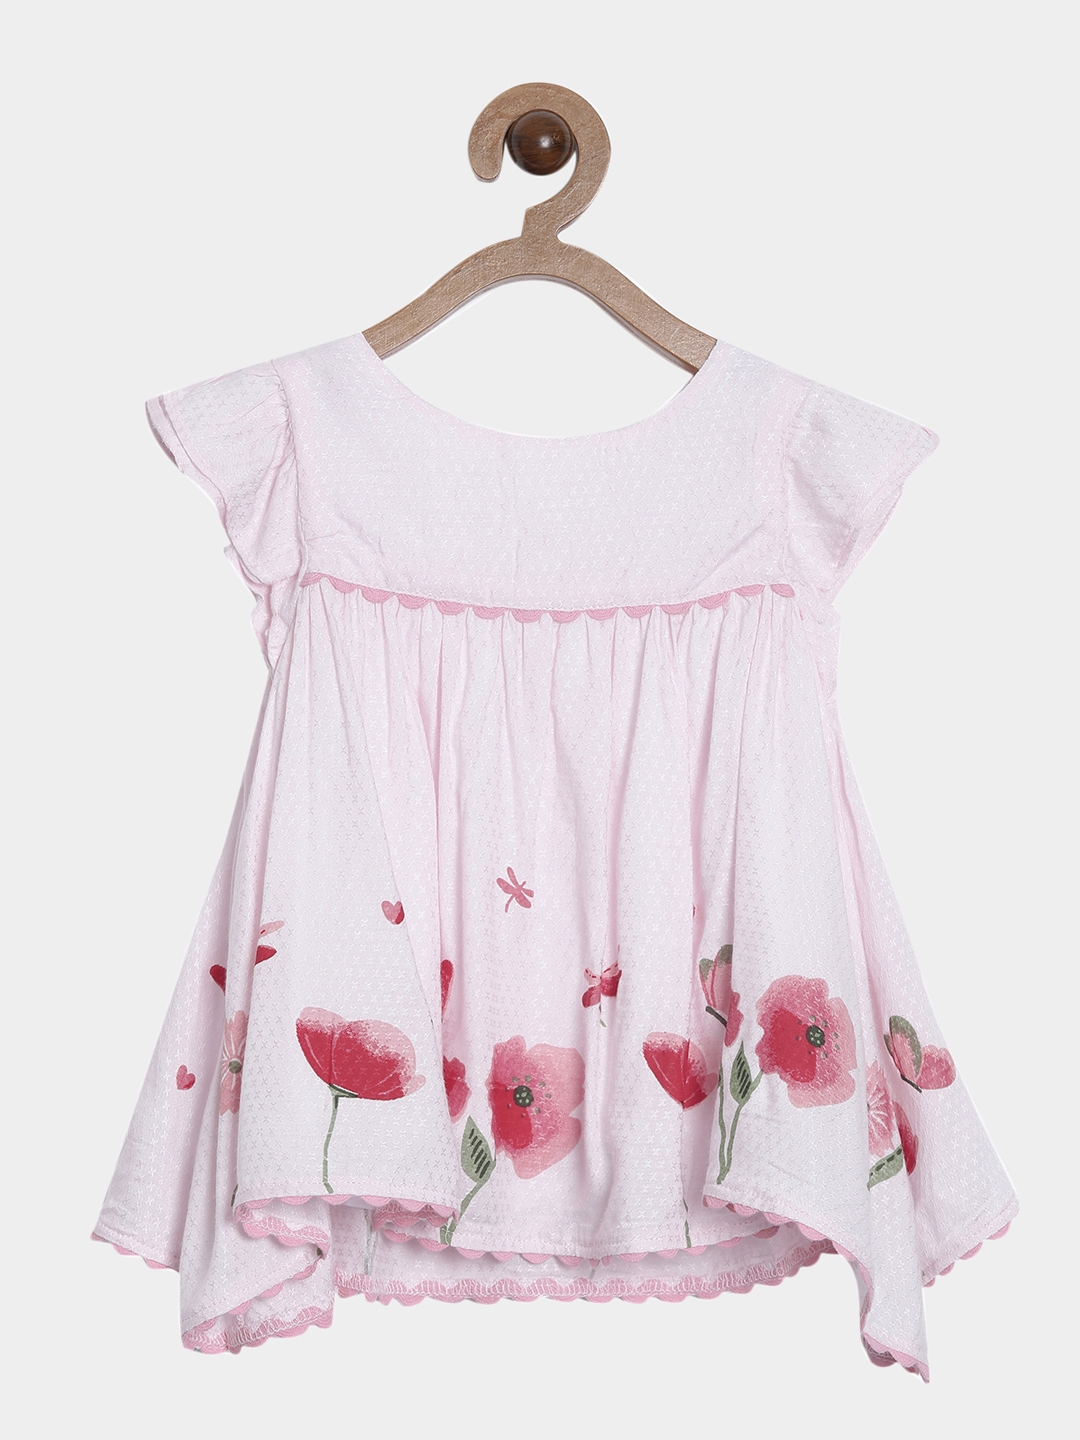 Nuberry | Nuberry Girls Casual Woven Light Pink Frock